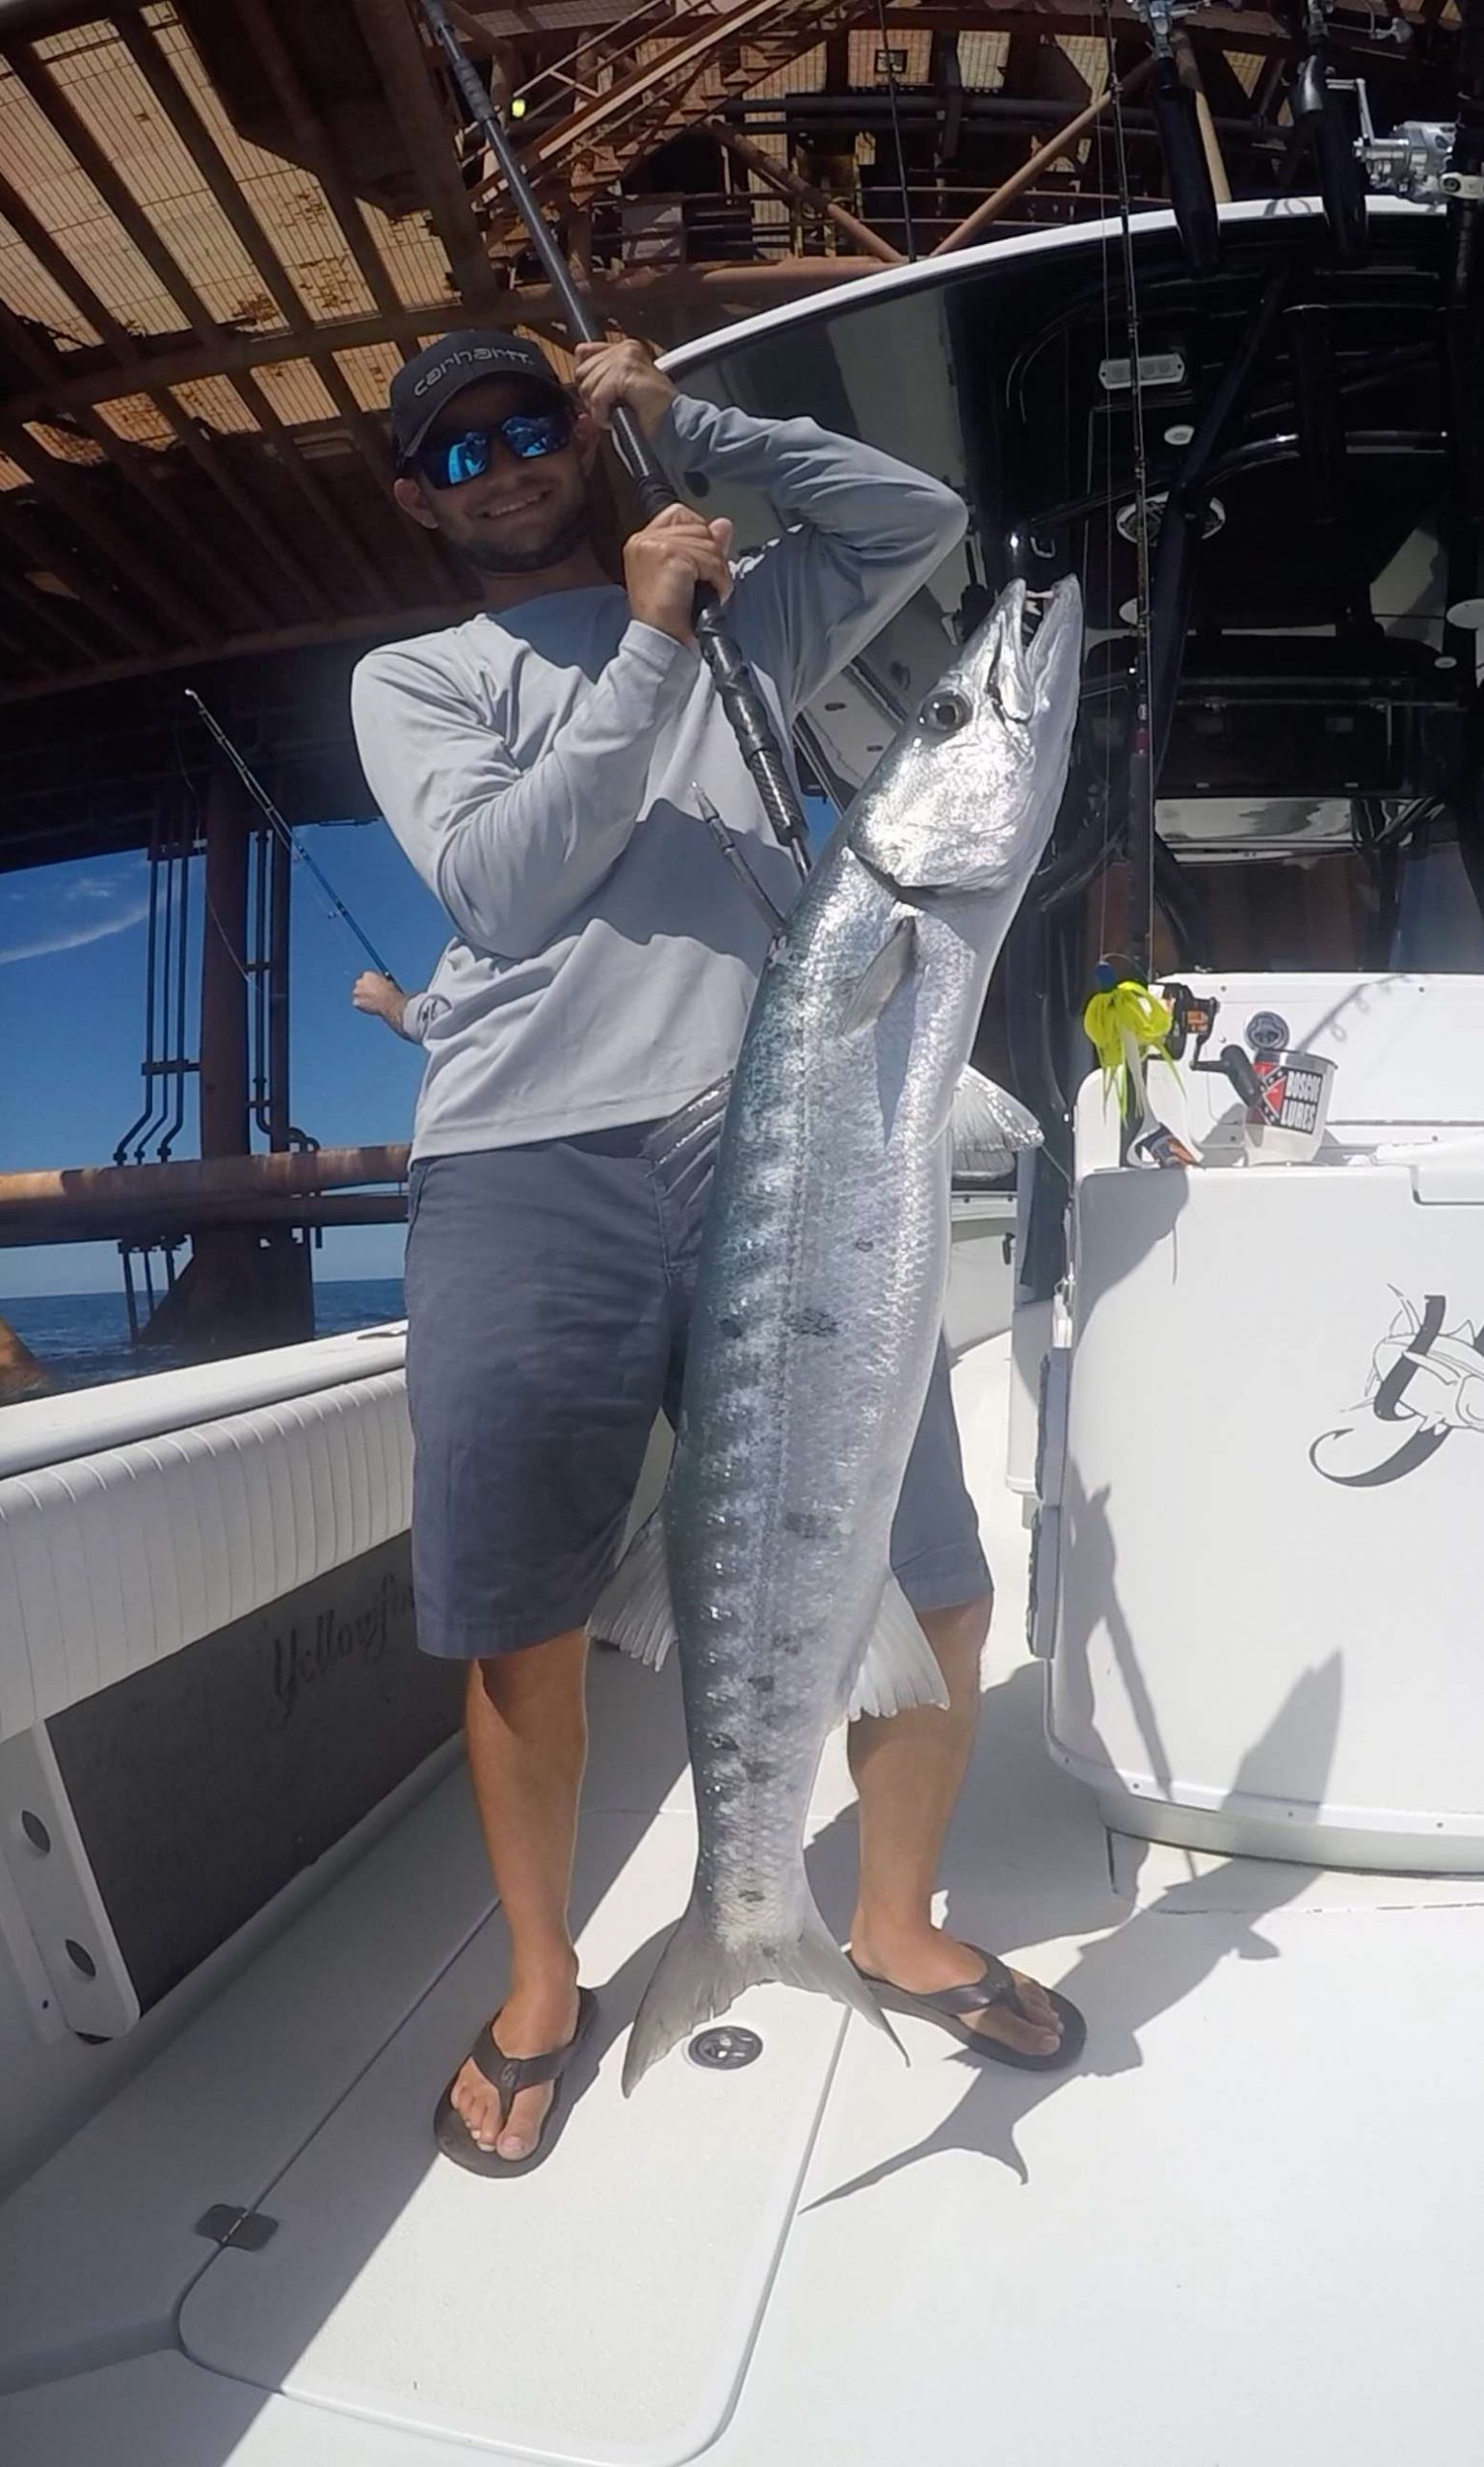 At this point in the day, this barracuda represents the biggest fish Lee has ever landed.